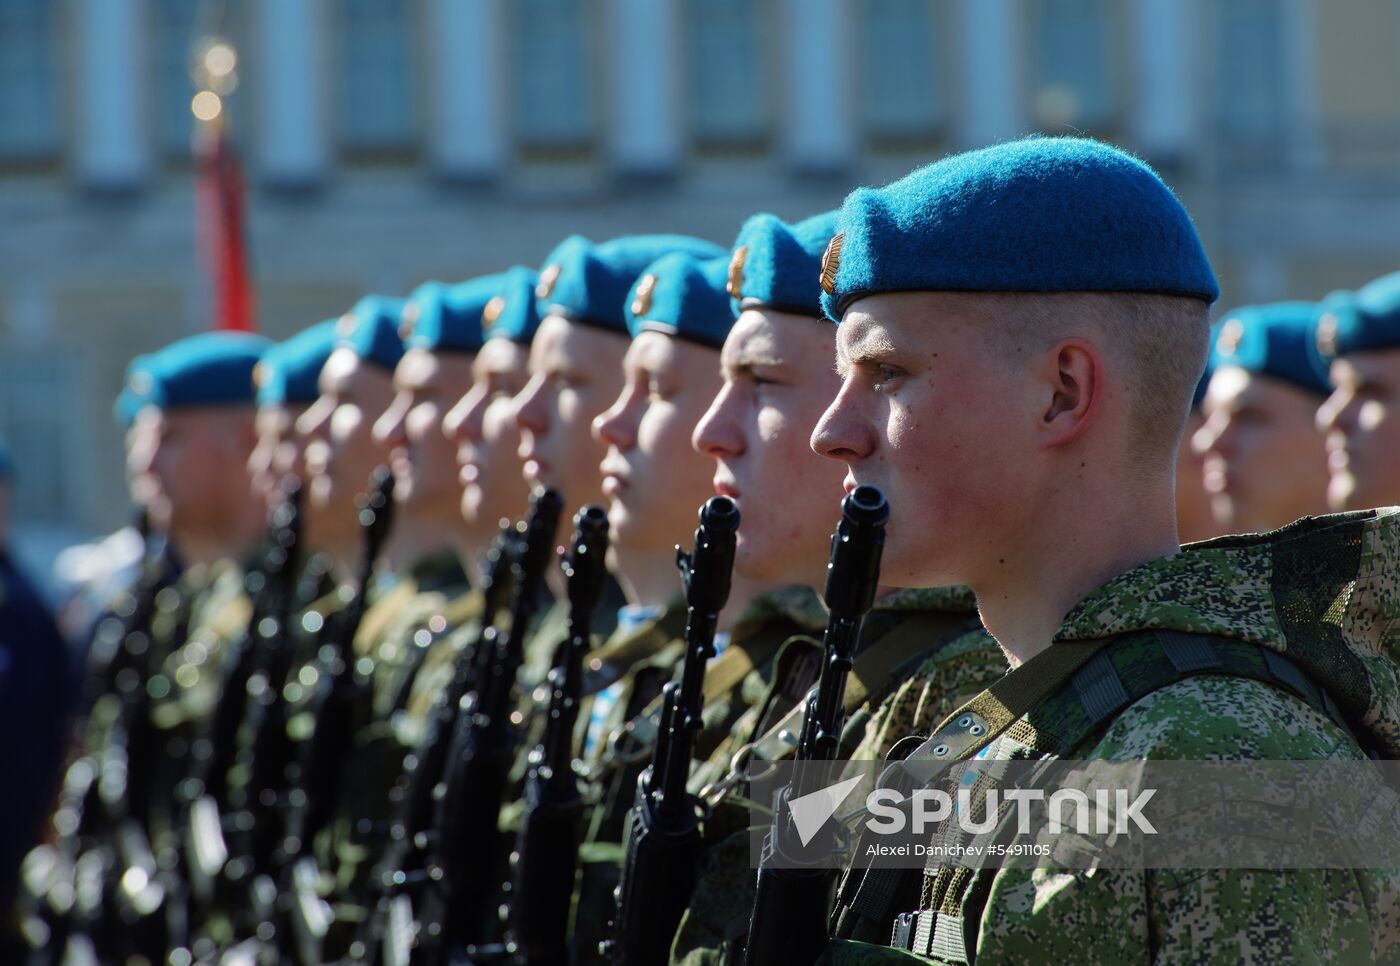 Final rehearsal of Victory Day Parade in St. Petersburg